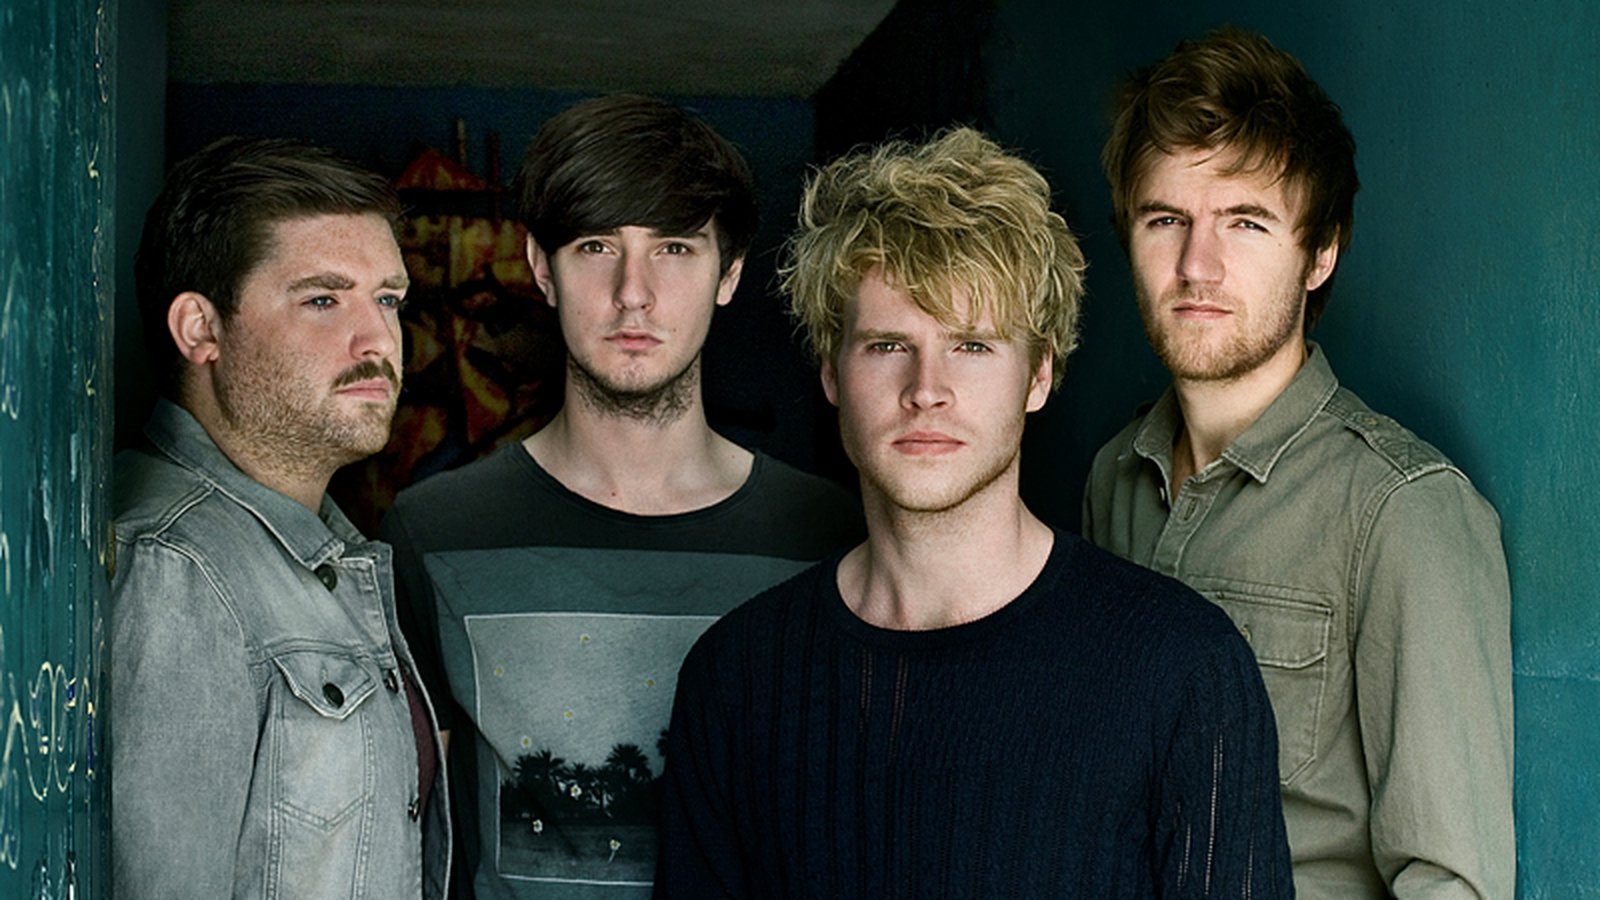 Kodaline everything works out in the end